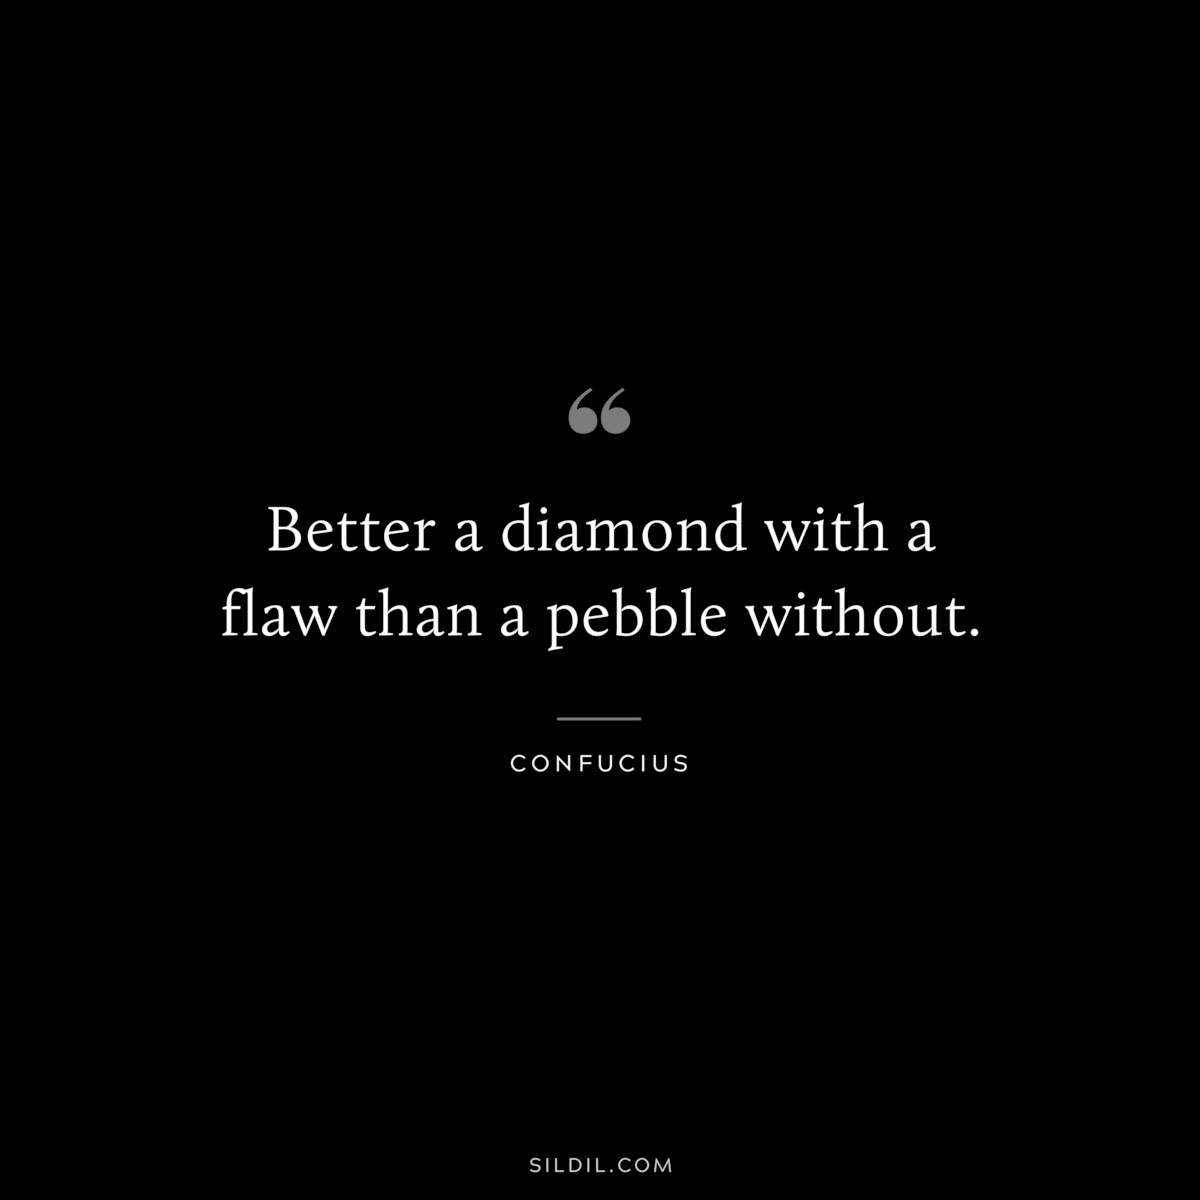 Better a diamond with a flaw than a pebble without. ― Confucius